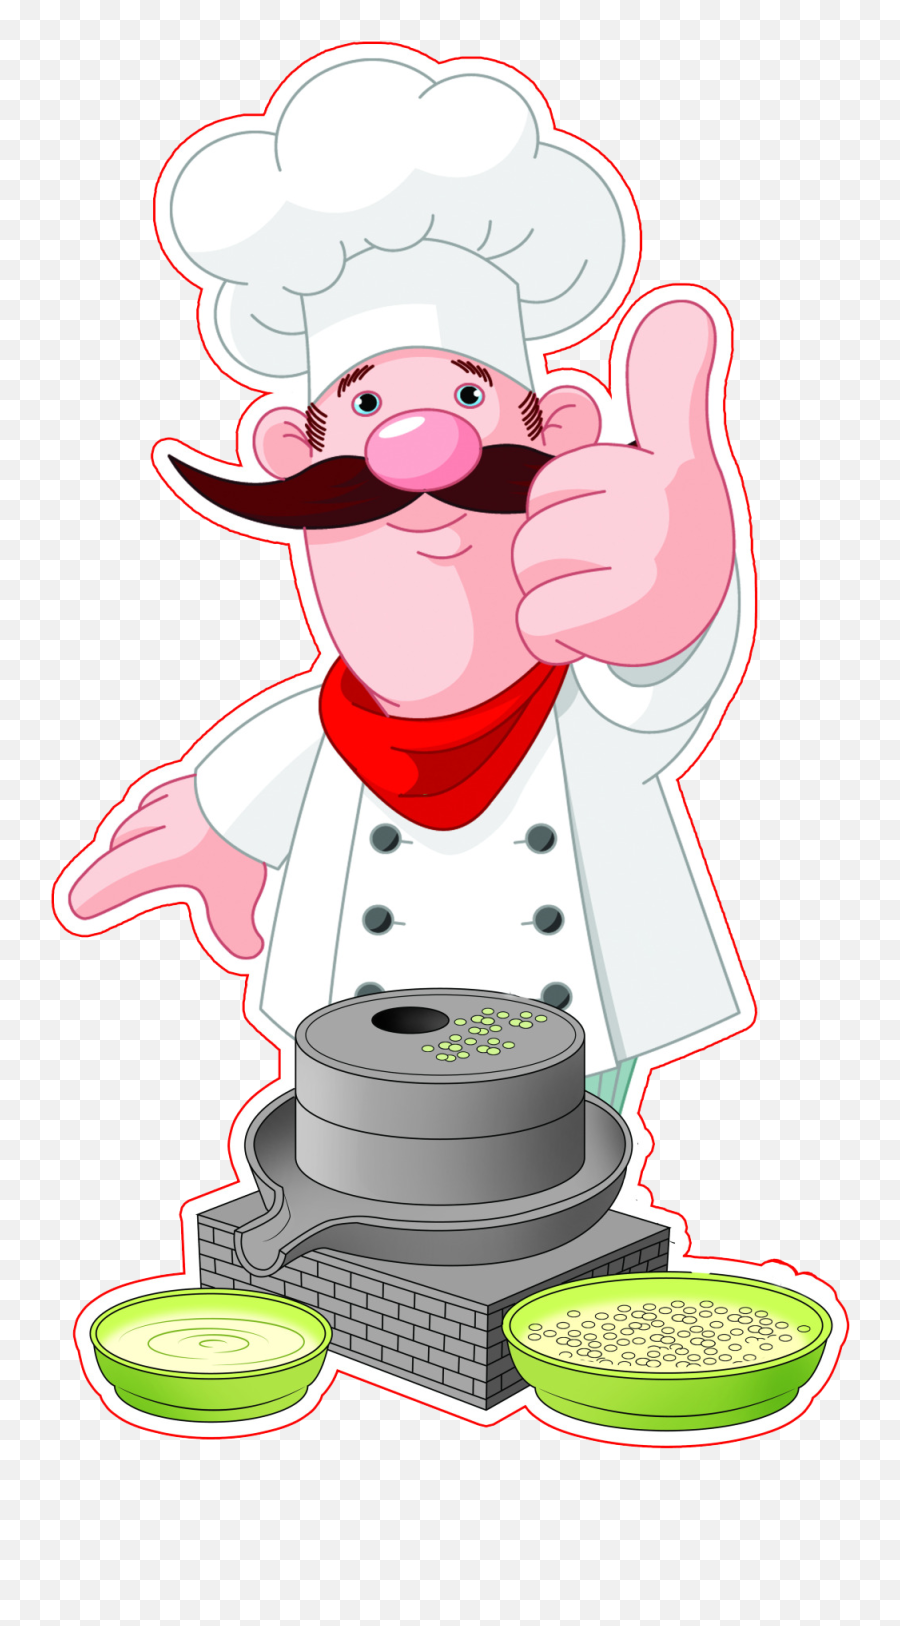 Chef Royalty - Chef Pictures Art Cartoon Emoji,Cook Clipart